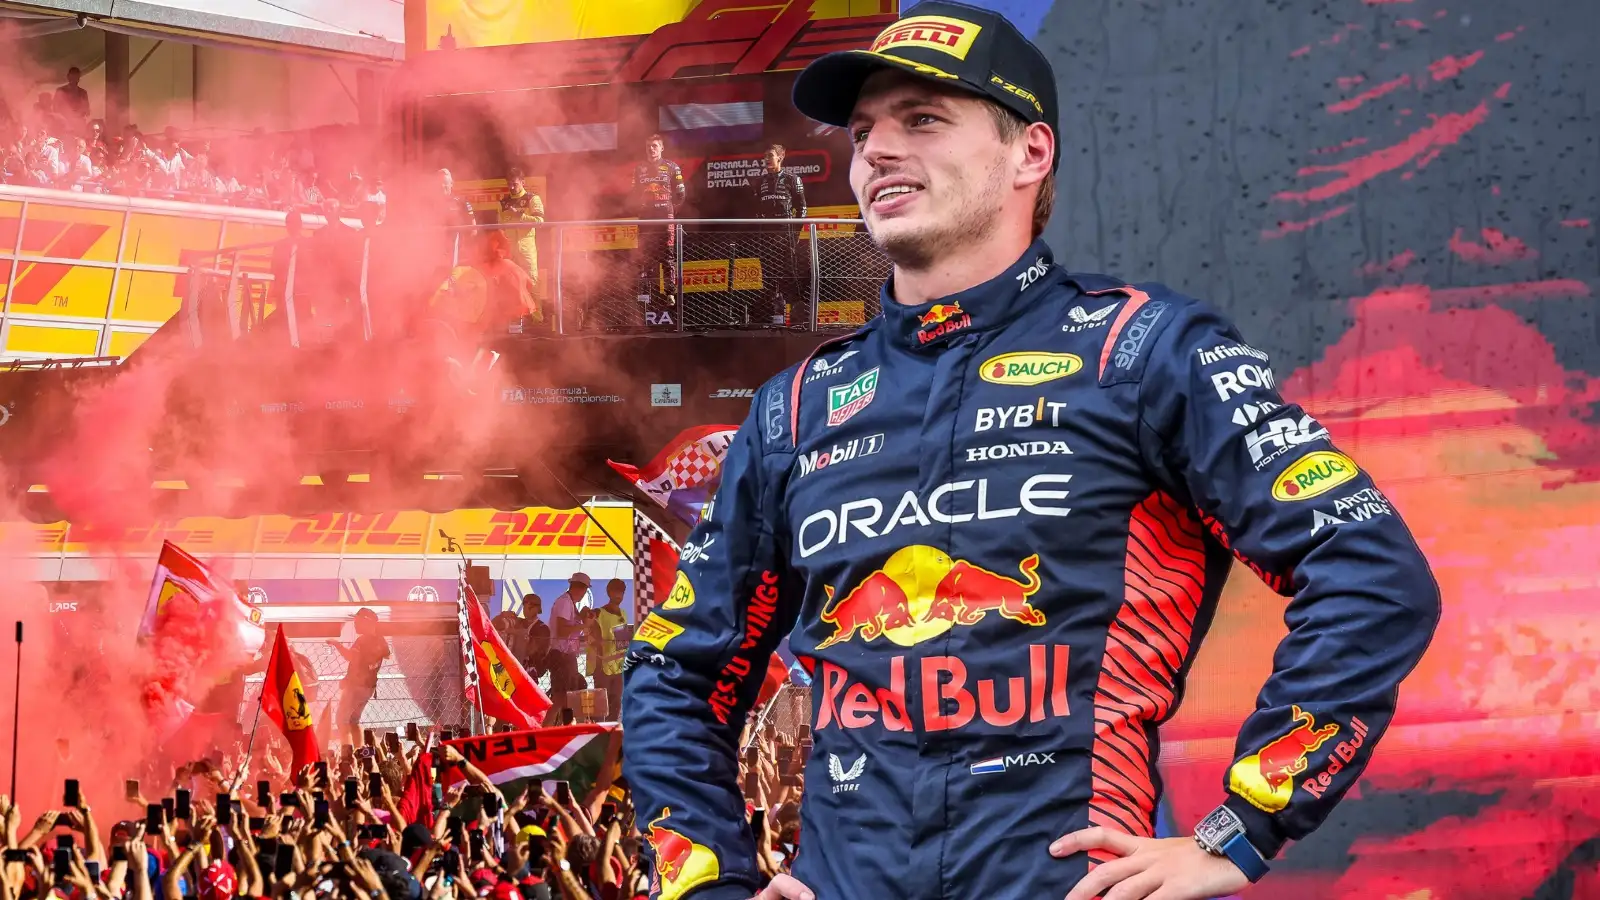 Red Bull's Max Verstappen and the Monza crowd.